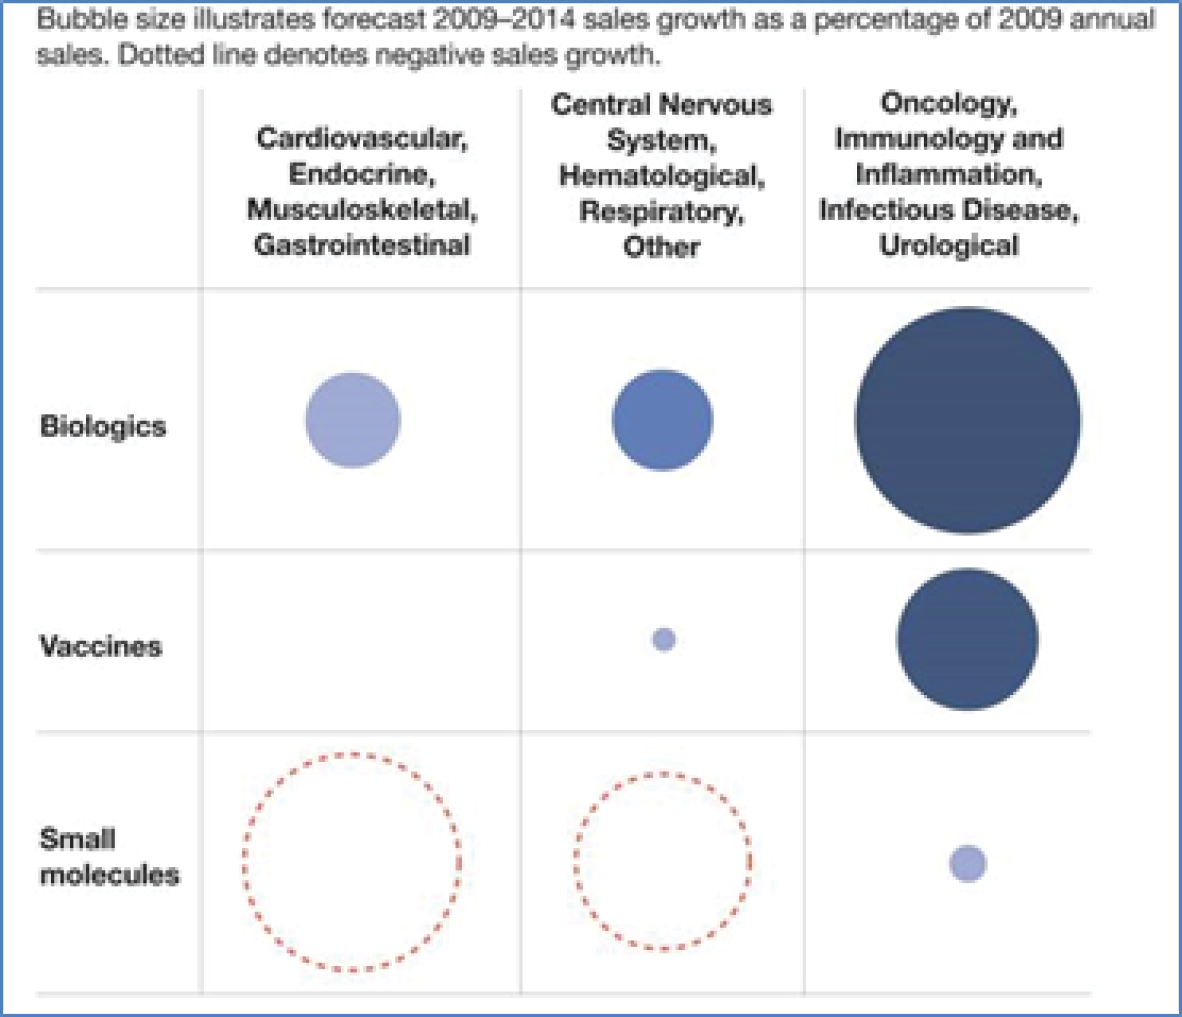 biologics, vaccines, small molecules, cardiovascular endocrine musculoskeletal gastrointestinal chart and market size and sales growth